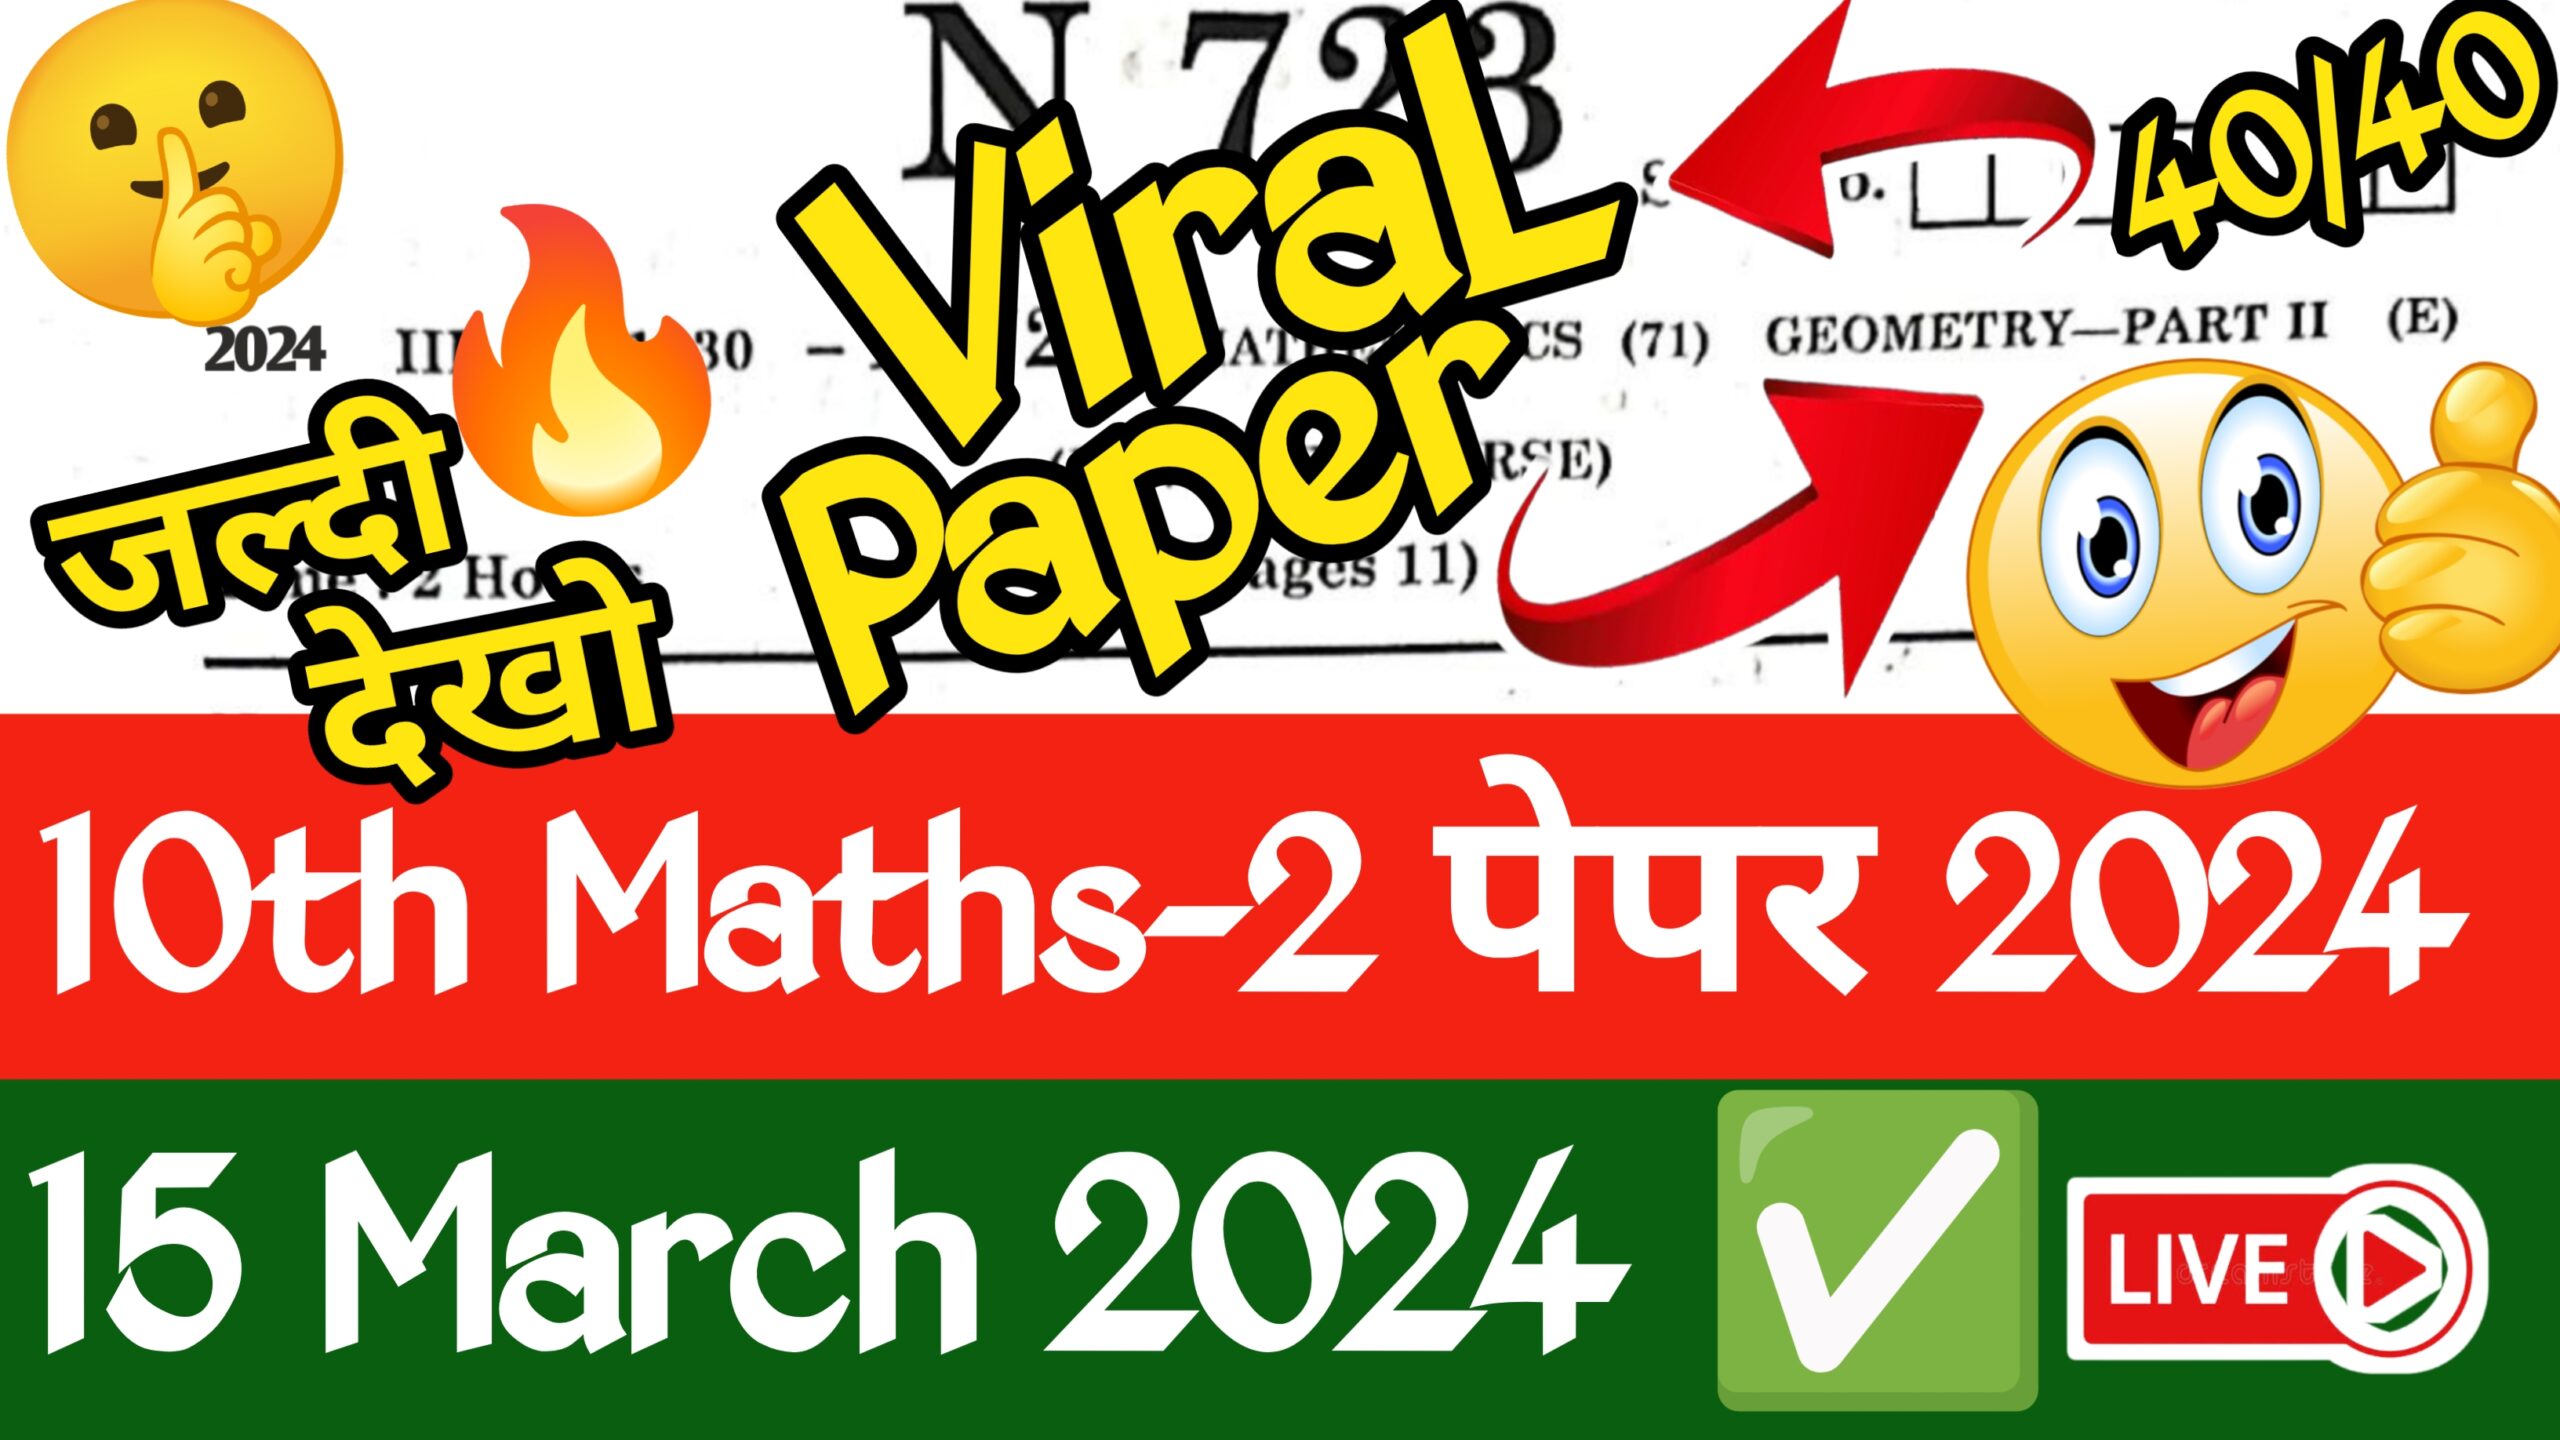 SSC MATHS 2 QUESTION PAPER 2024 WITH PDF DOWNLOAD MAHARASHTRA BOARD, SSC maths 2 board question paper 2024,ssc geometry paper 2024 Maharashtra board 